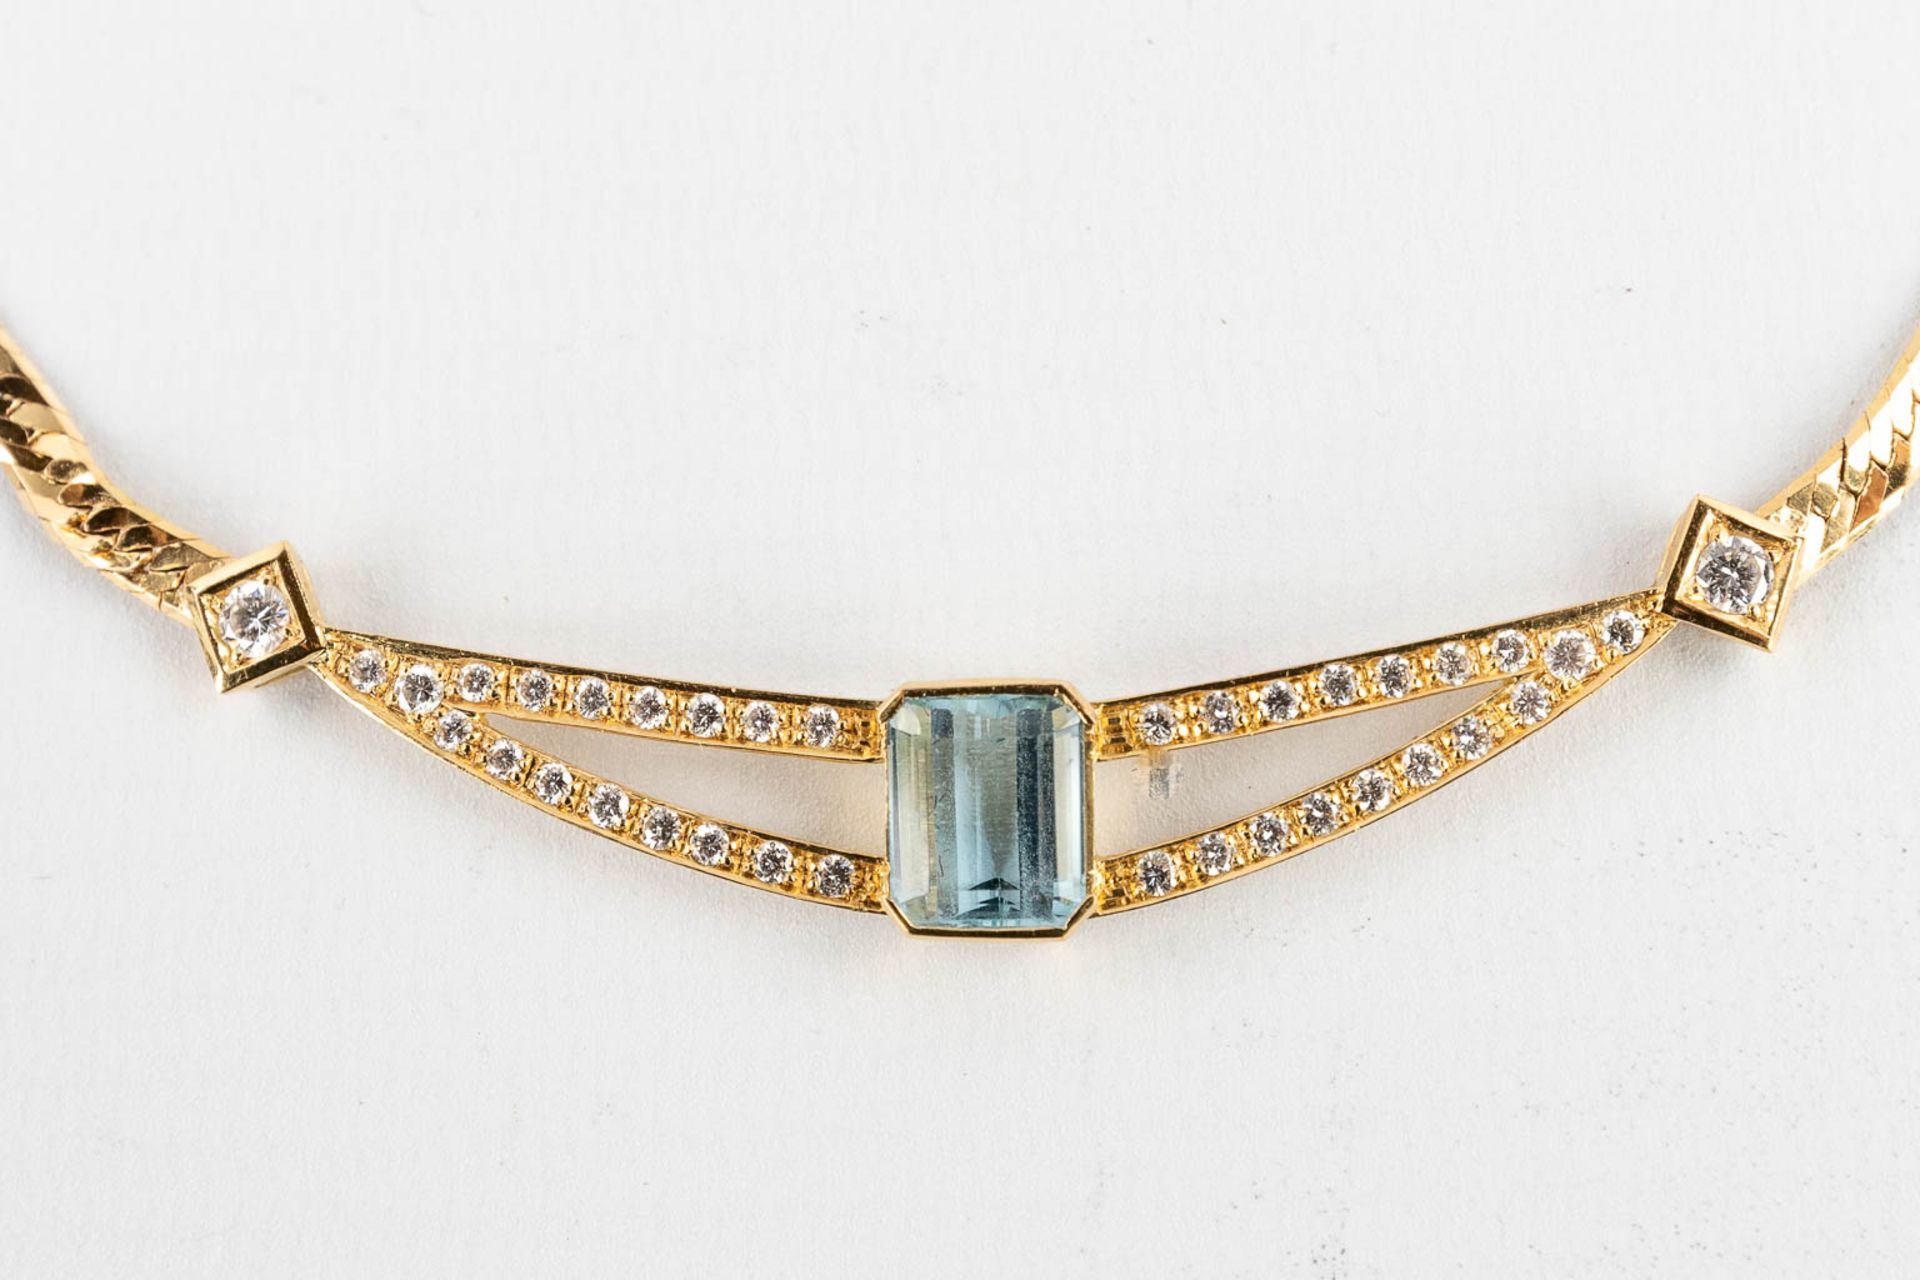 A necklace with two earrings, 18kt yellow gold Brilliants and Topaz/Aquamarine, 26,77g. - Image 5 of 15